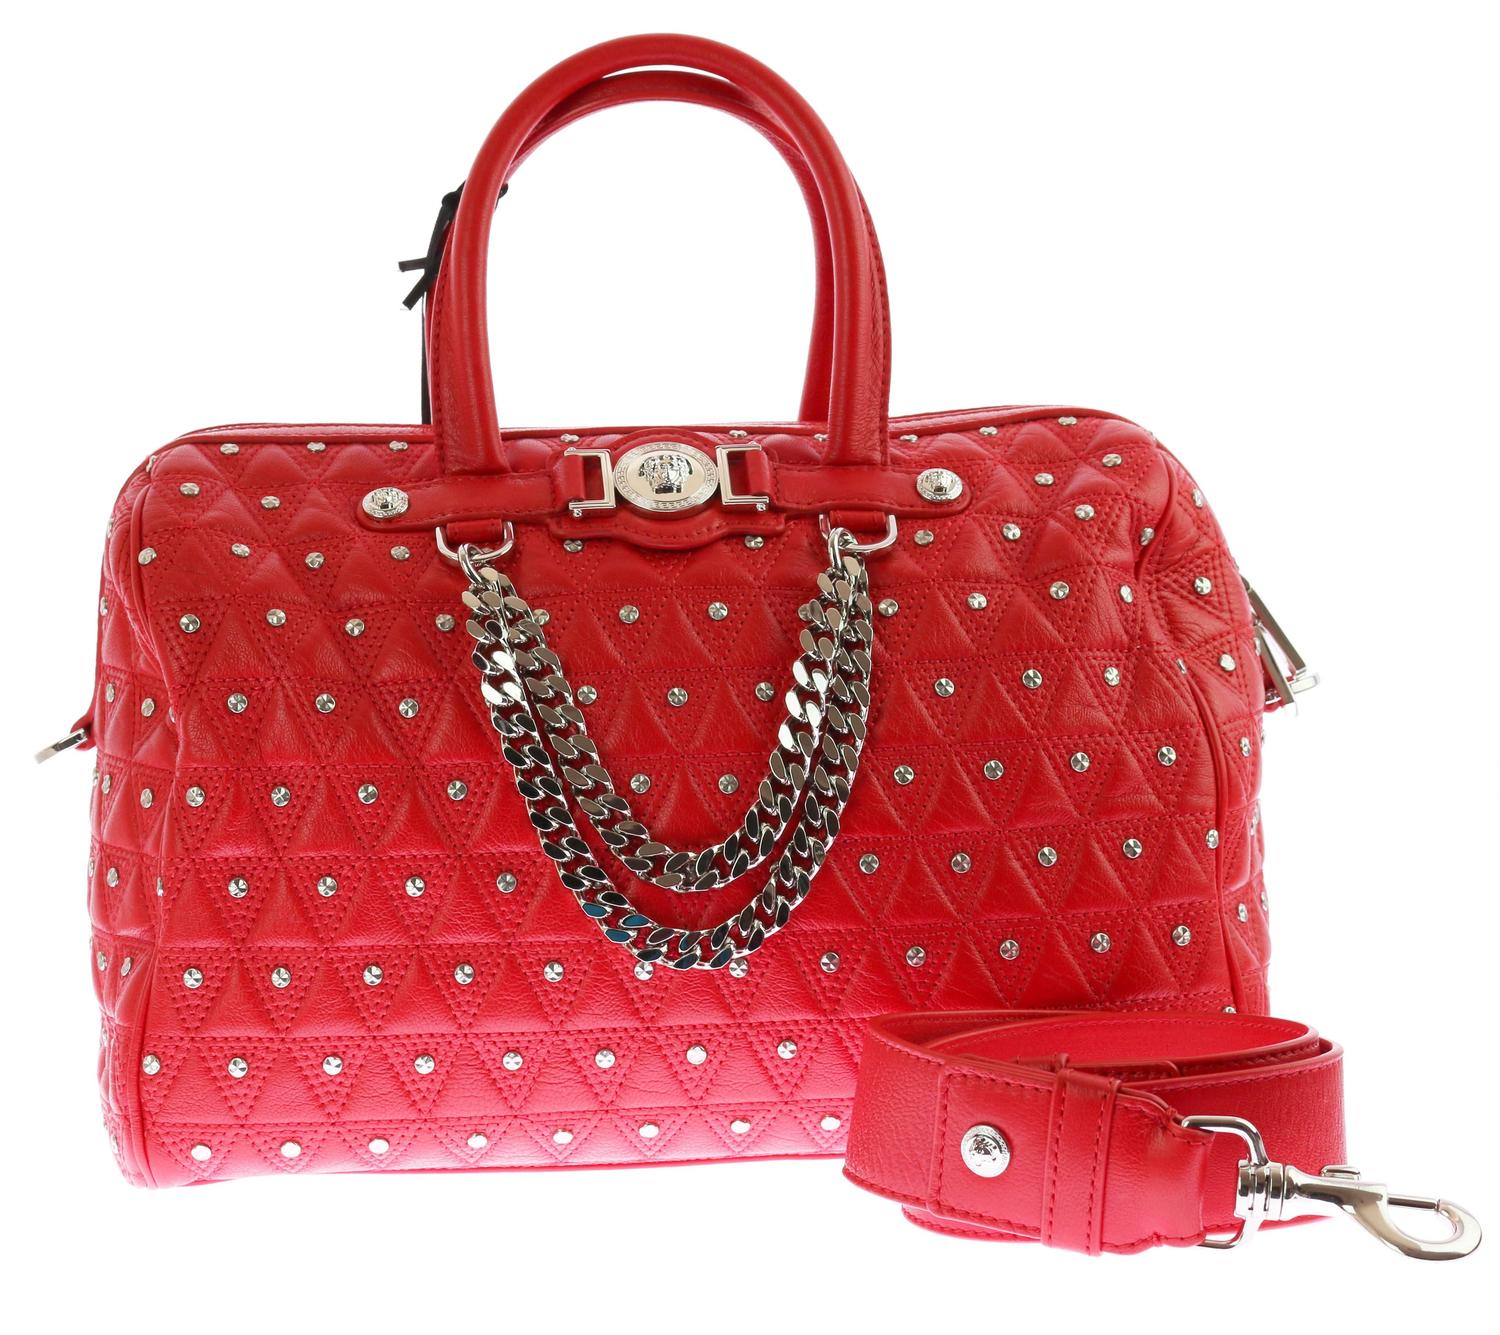 VERSACE &quot;Signature&quot; Studded Red Leather Duffle Bag For Sale at 1stdibs